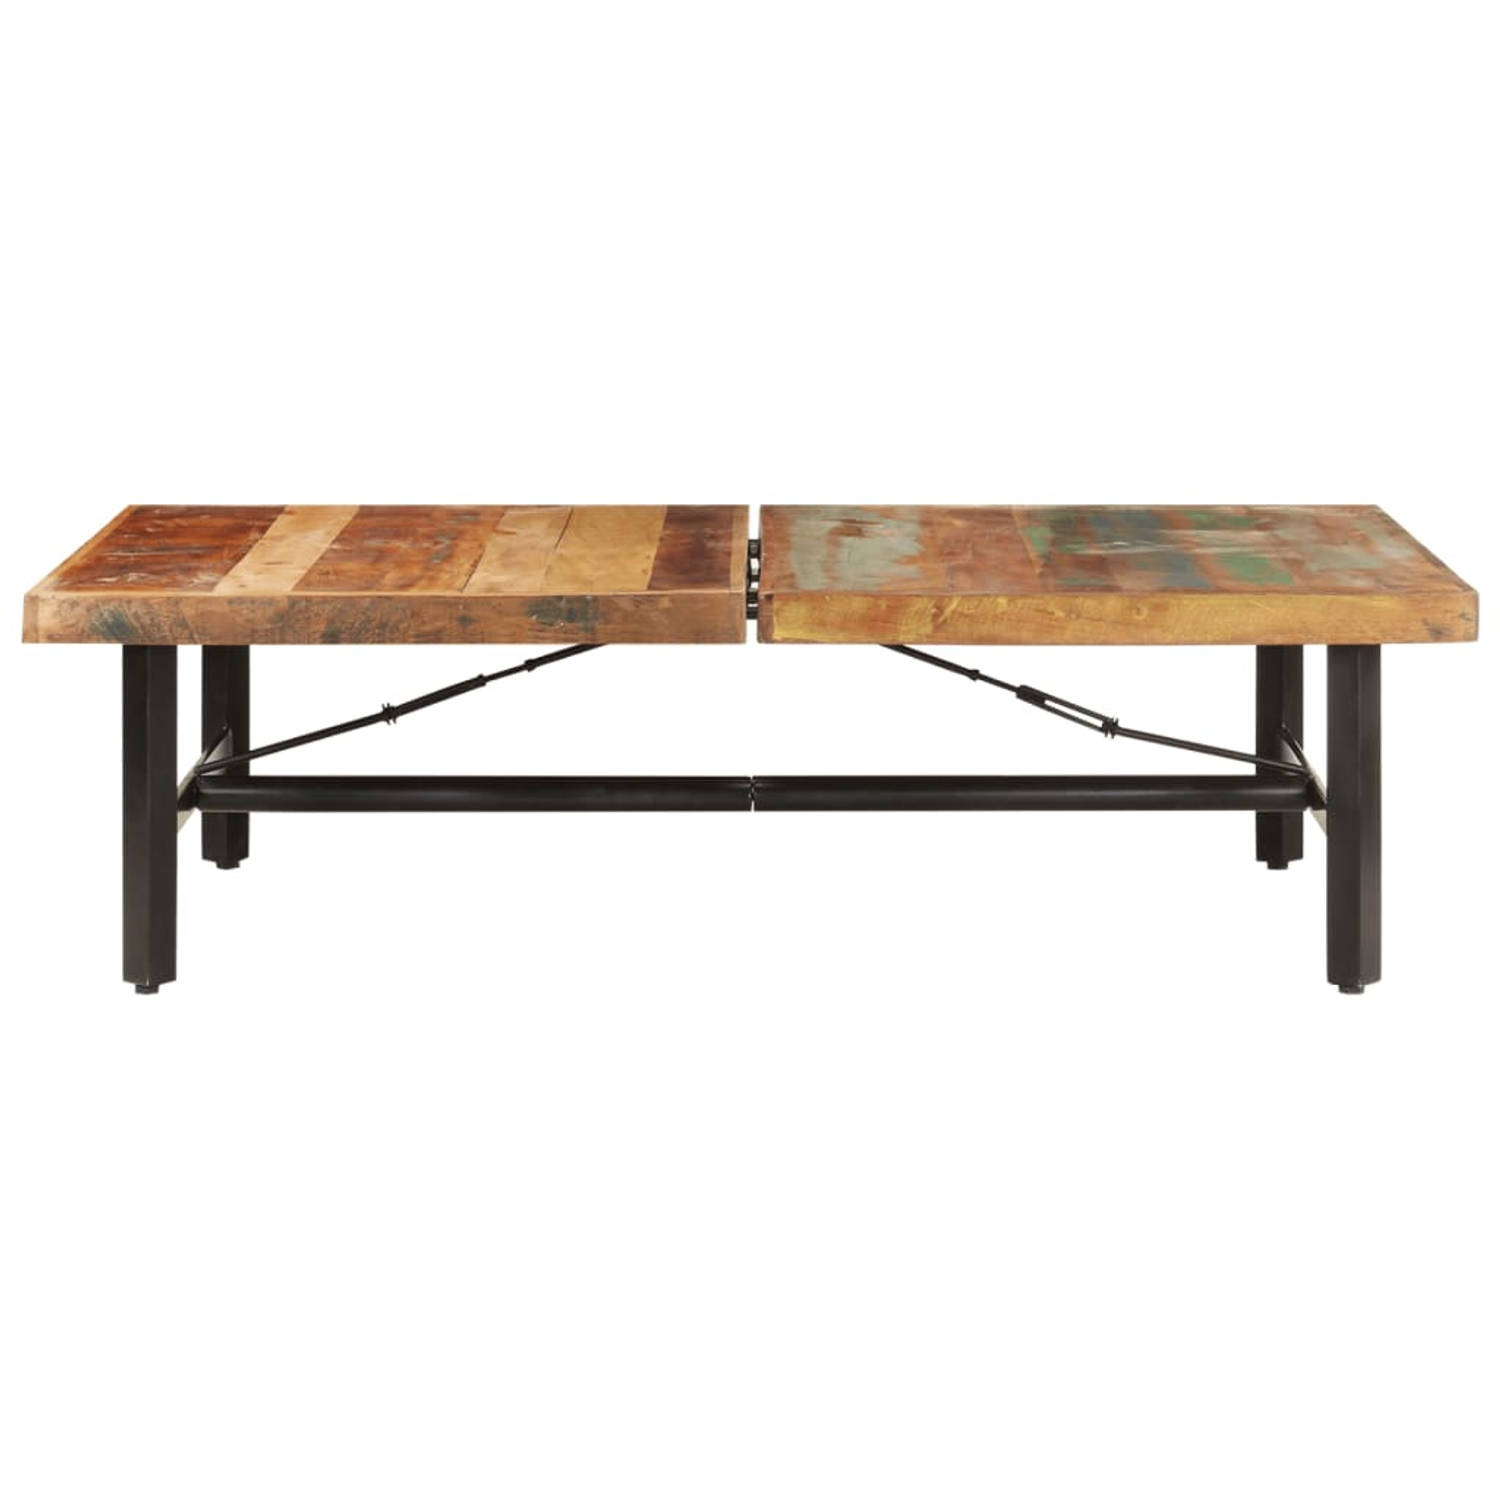 The Living Store Gerecycled Houten Salontafel 142x90x42 cm Multicolor IJzer